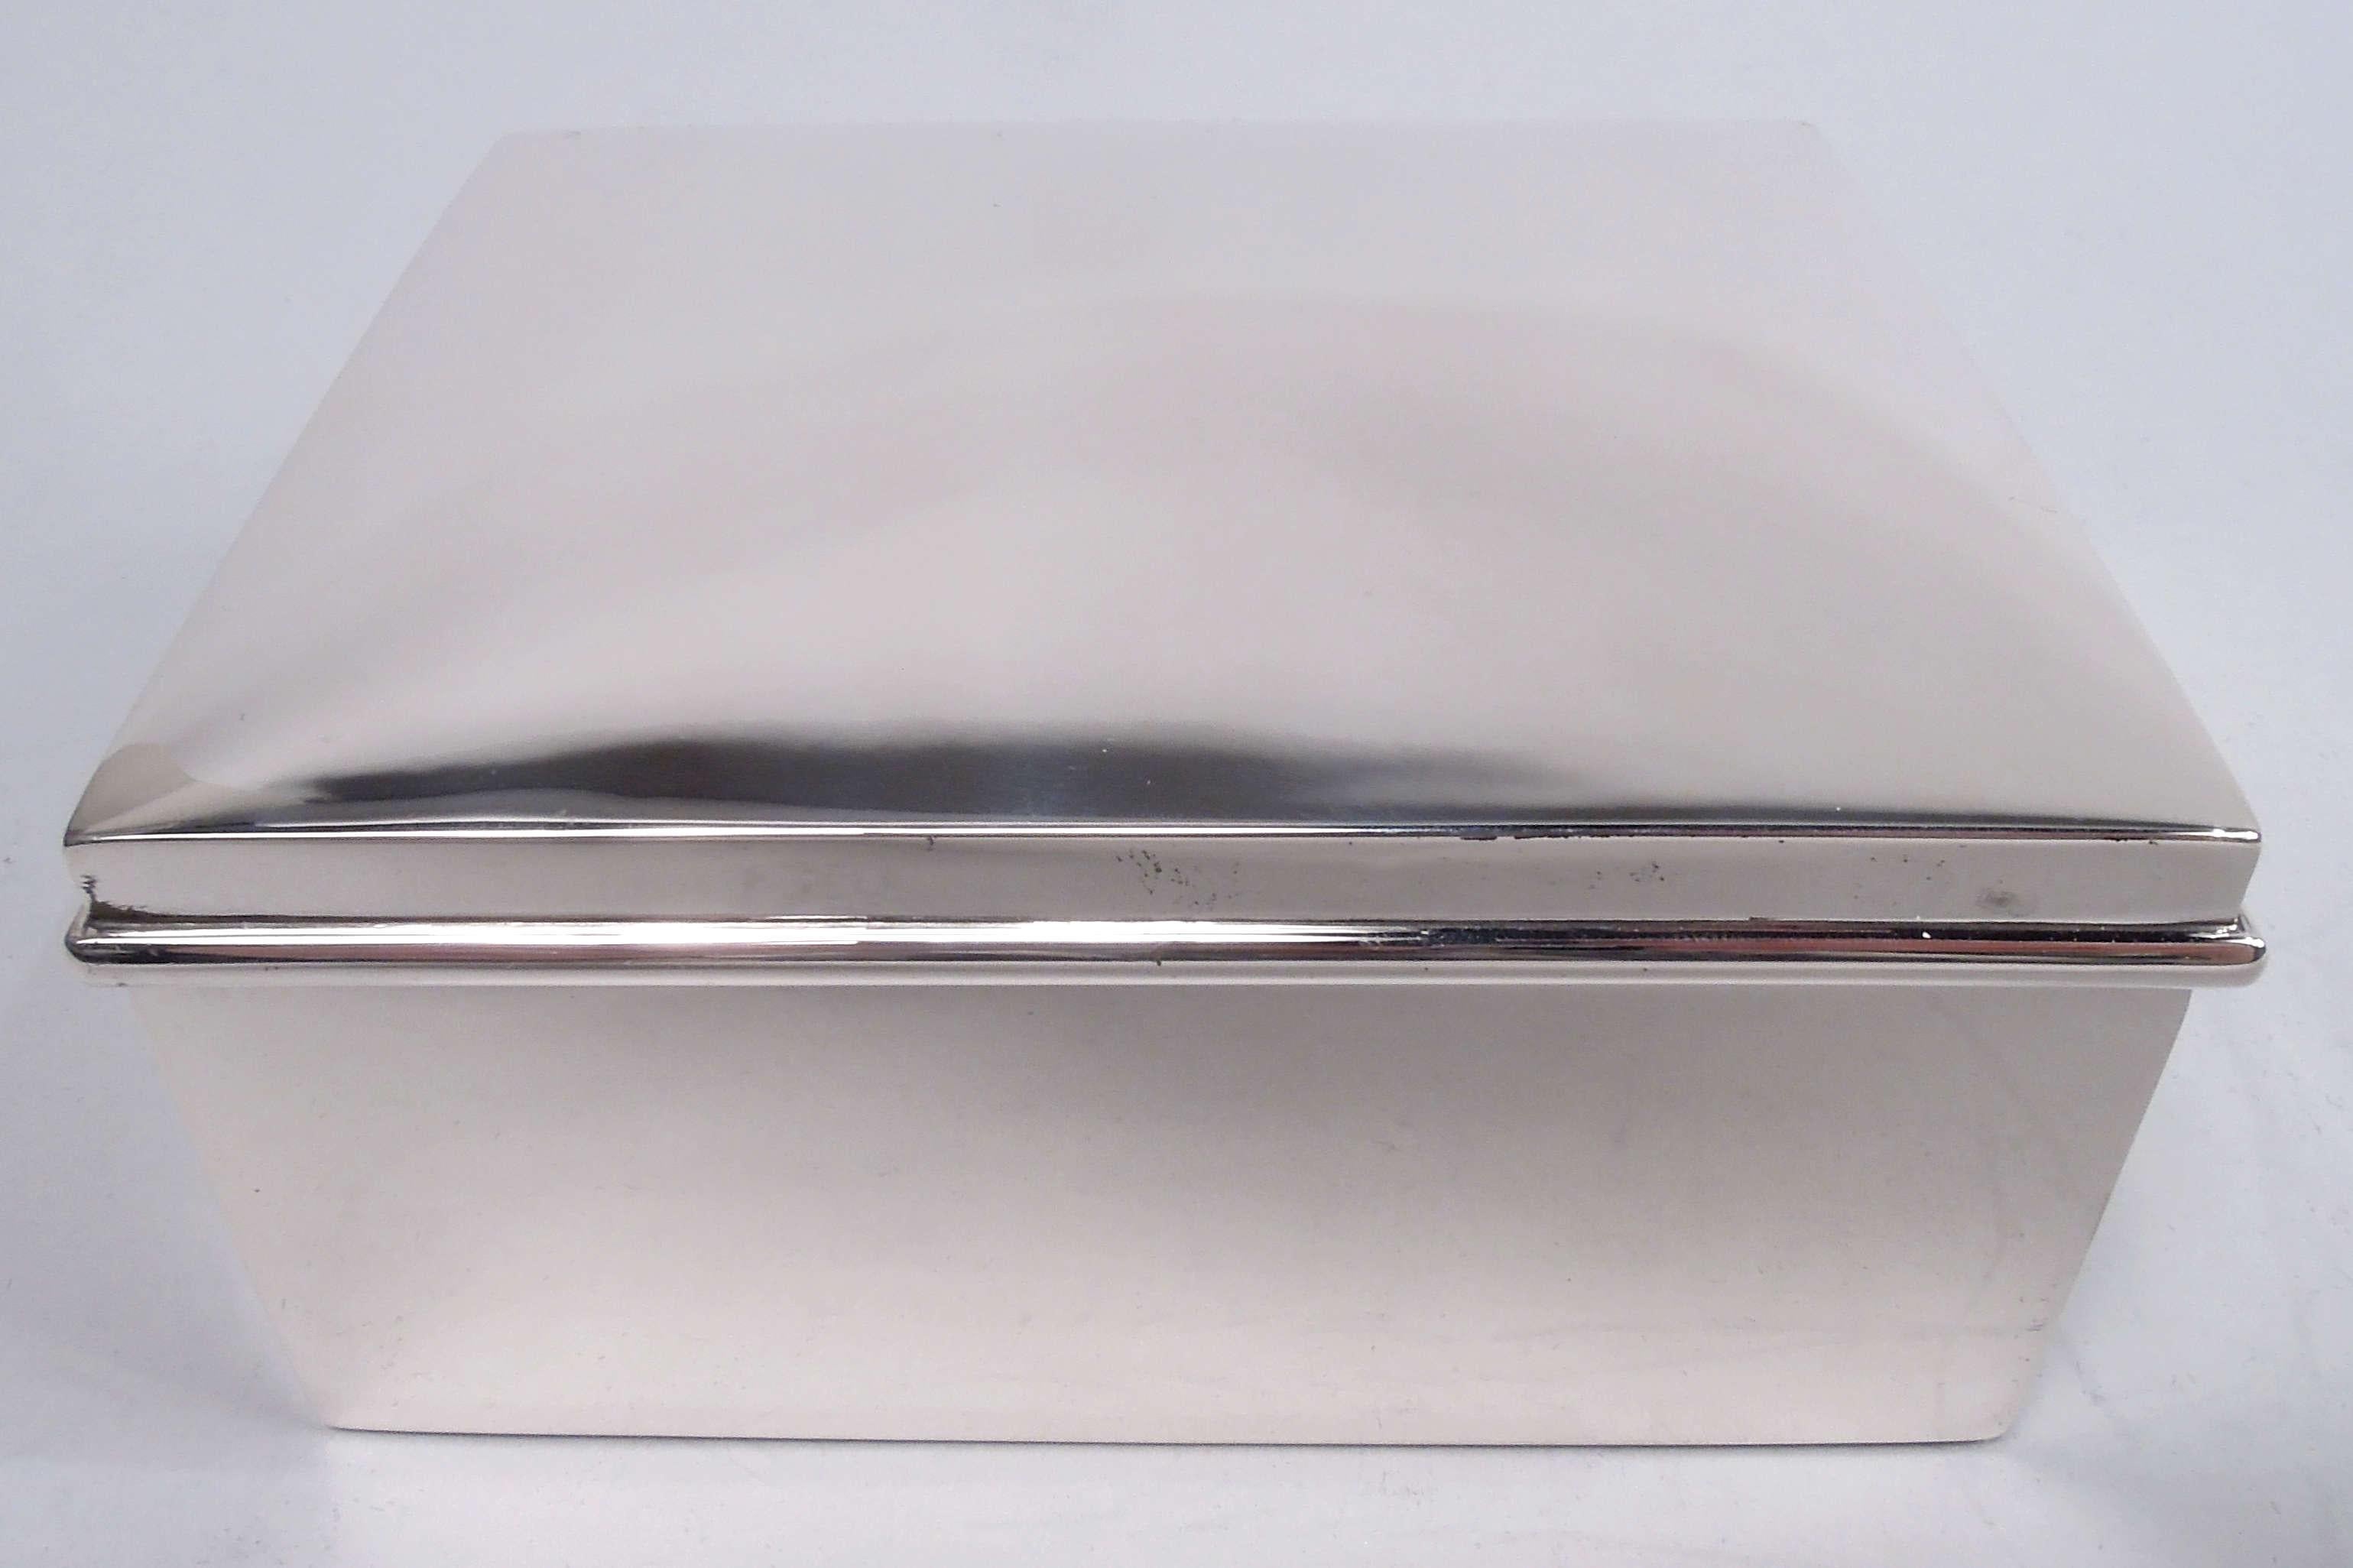 Modern sterling silver box, ca 1920. Retailed by Cartier in New York. Rectangular with straight sides. Cover hinged with curved top and overhanging rim. Interior cedar lined. Fully marked including maker’s (Ahrendt & Kautzman) and retailer’s stamps,